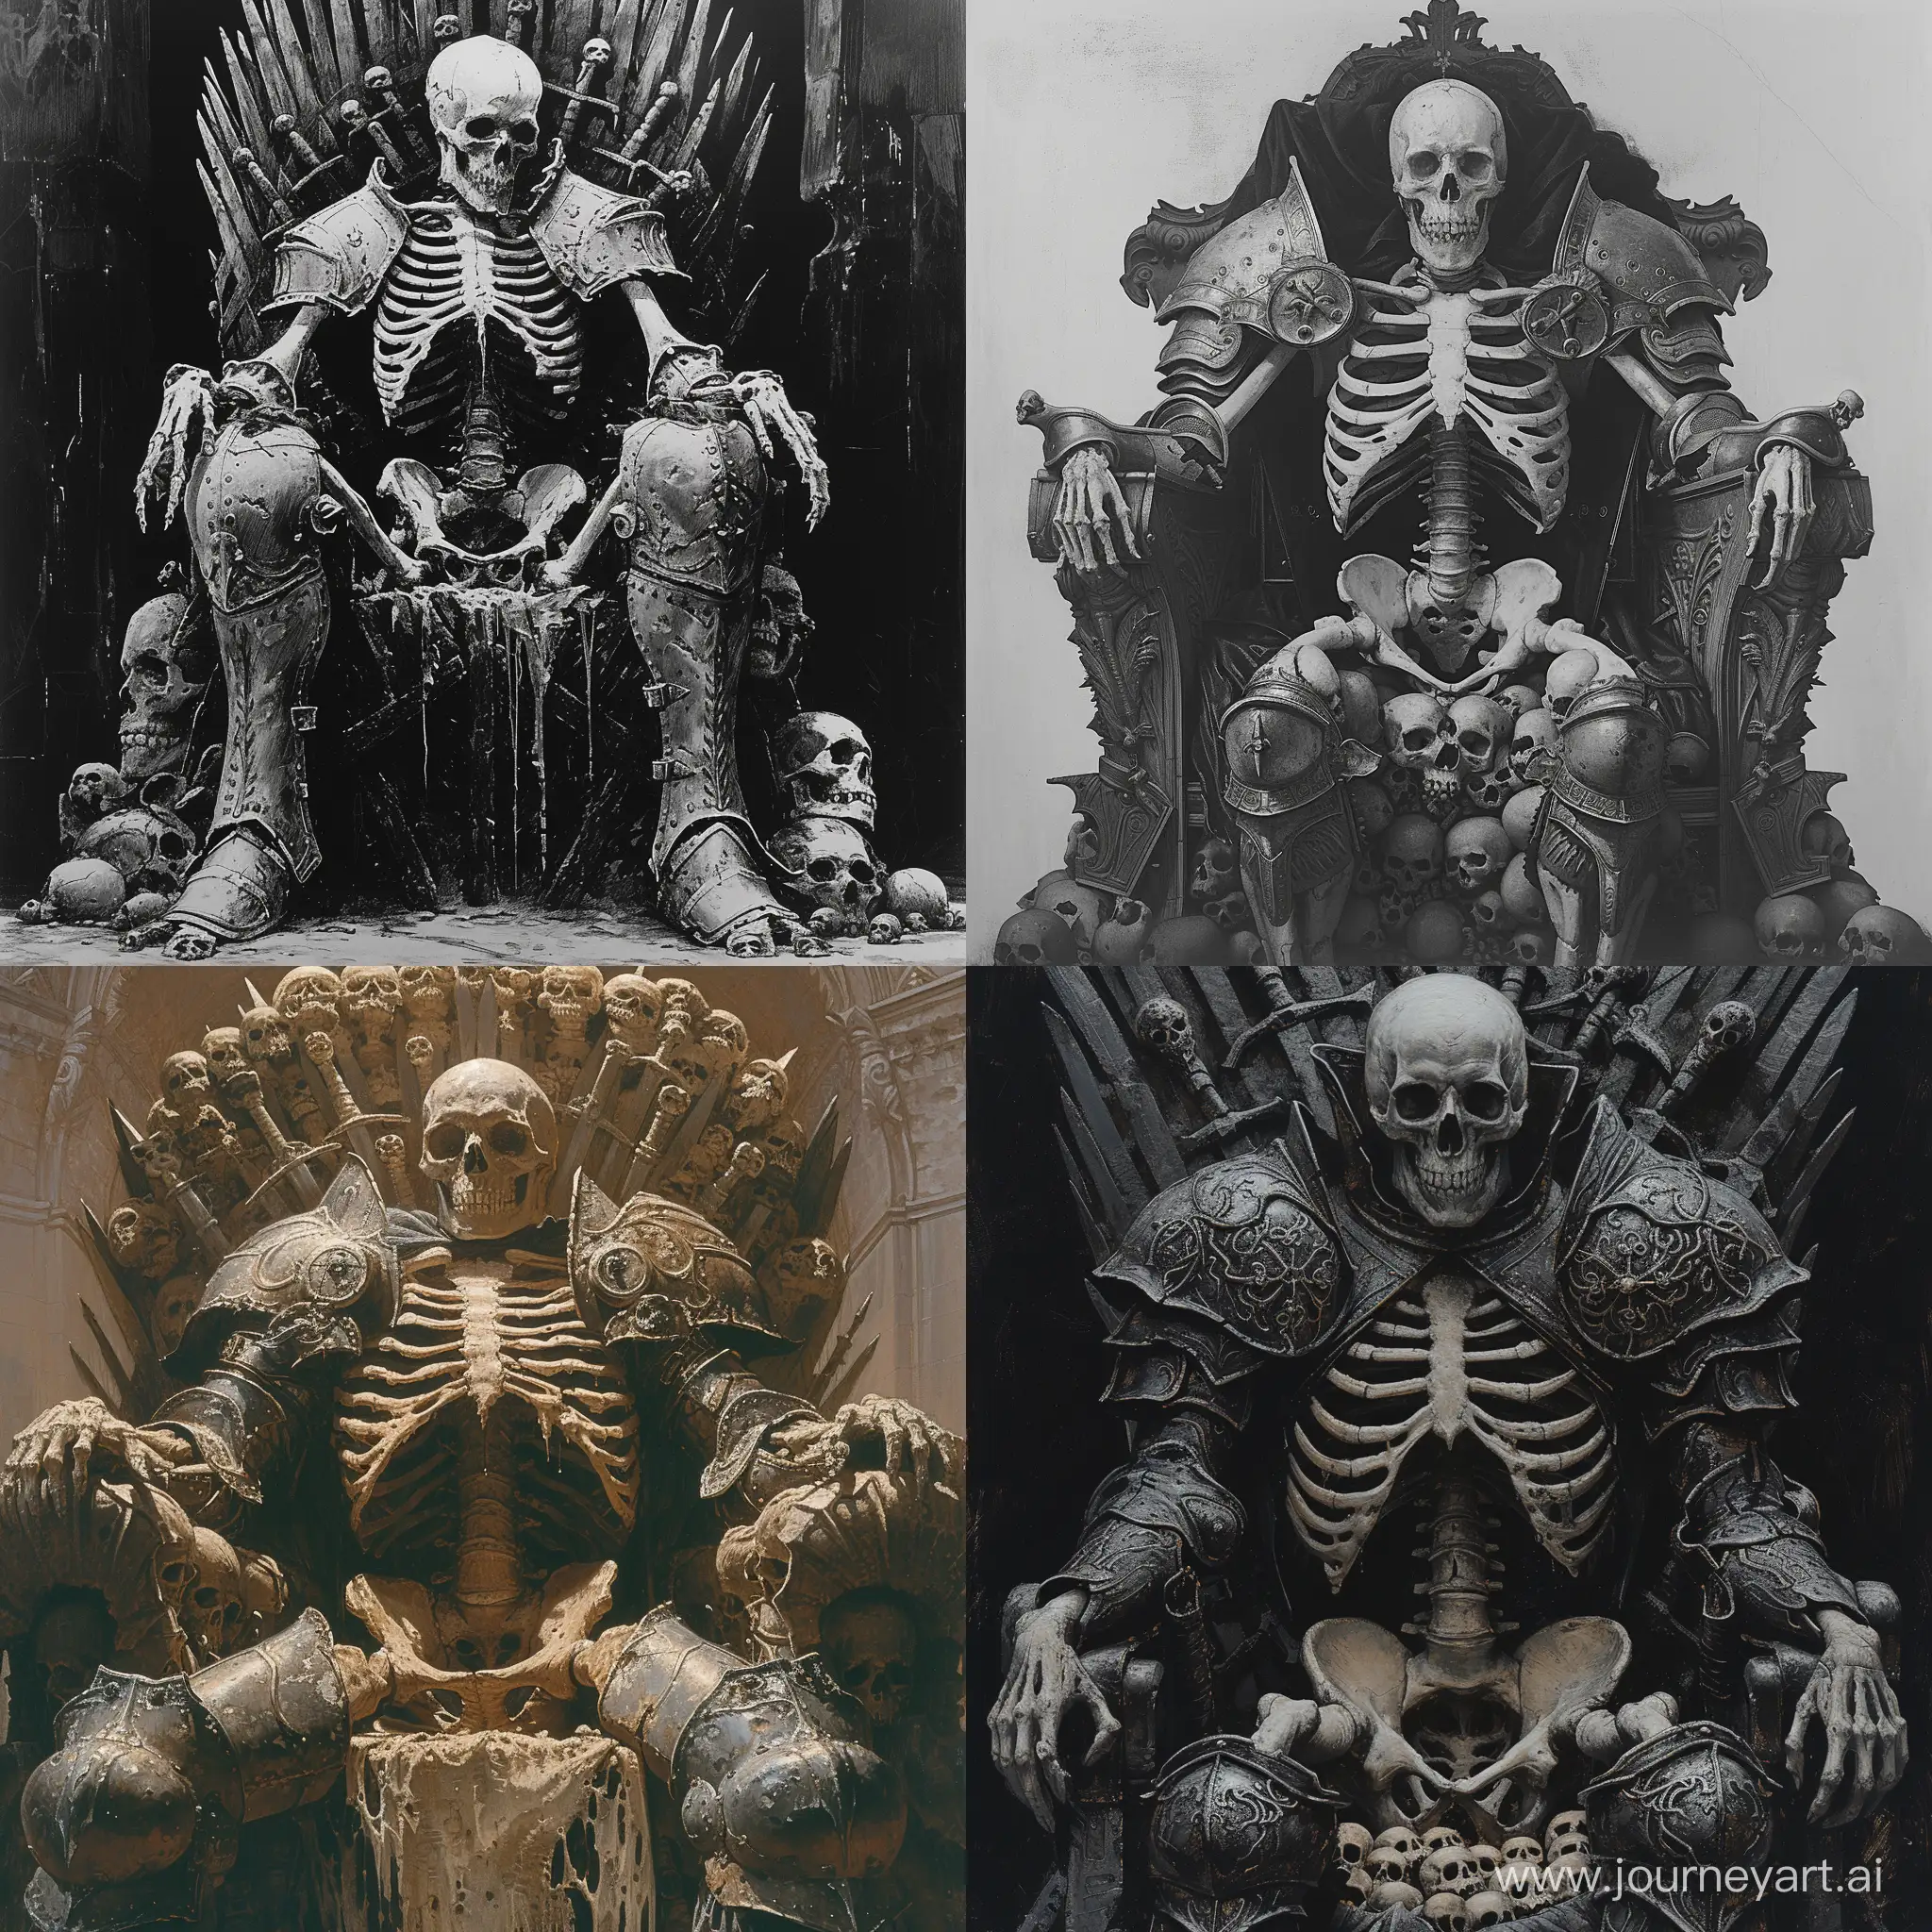 Huge, enormous, Skeleton king, sitting on a throne with armour, his ribcage is showing, his throne is made of skulls.